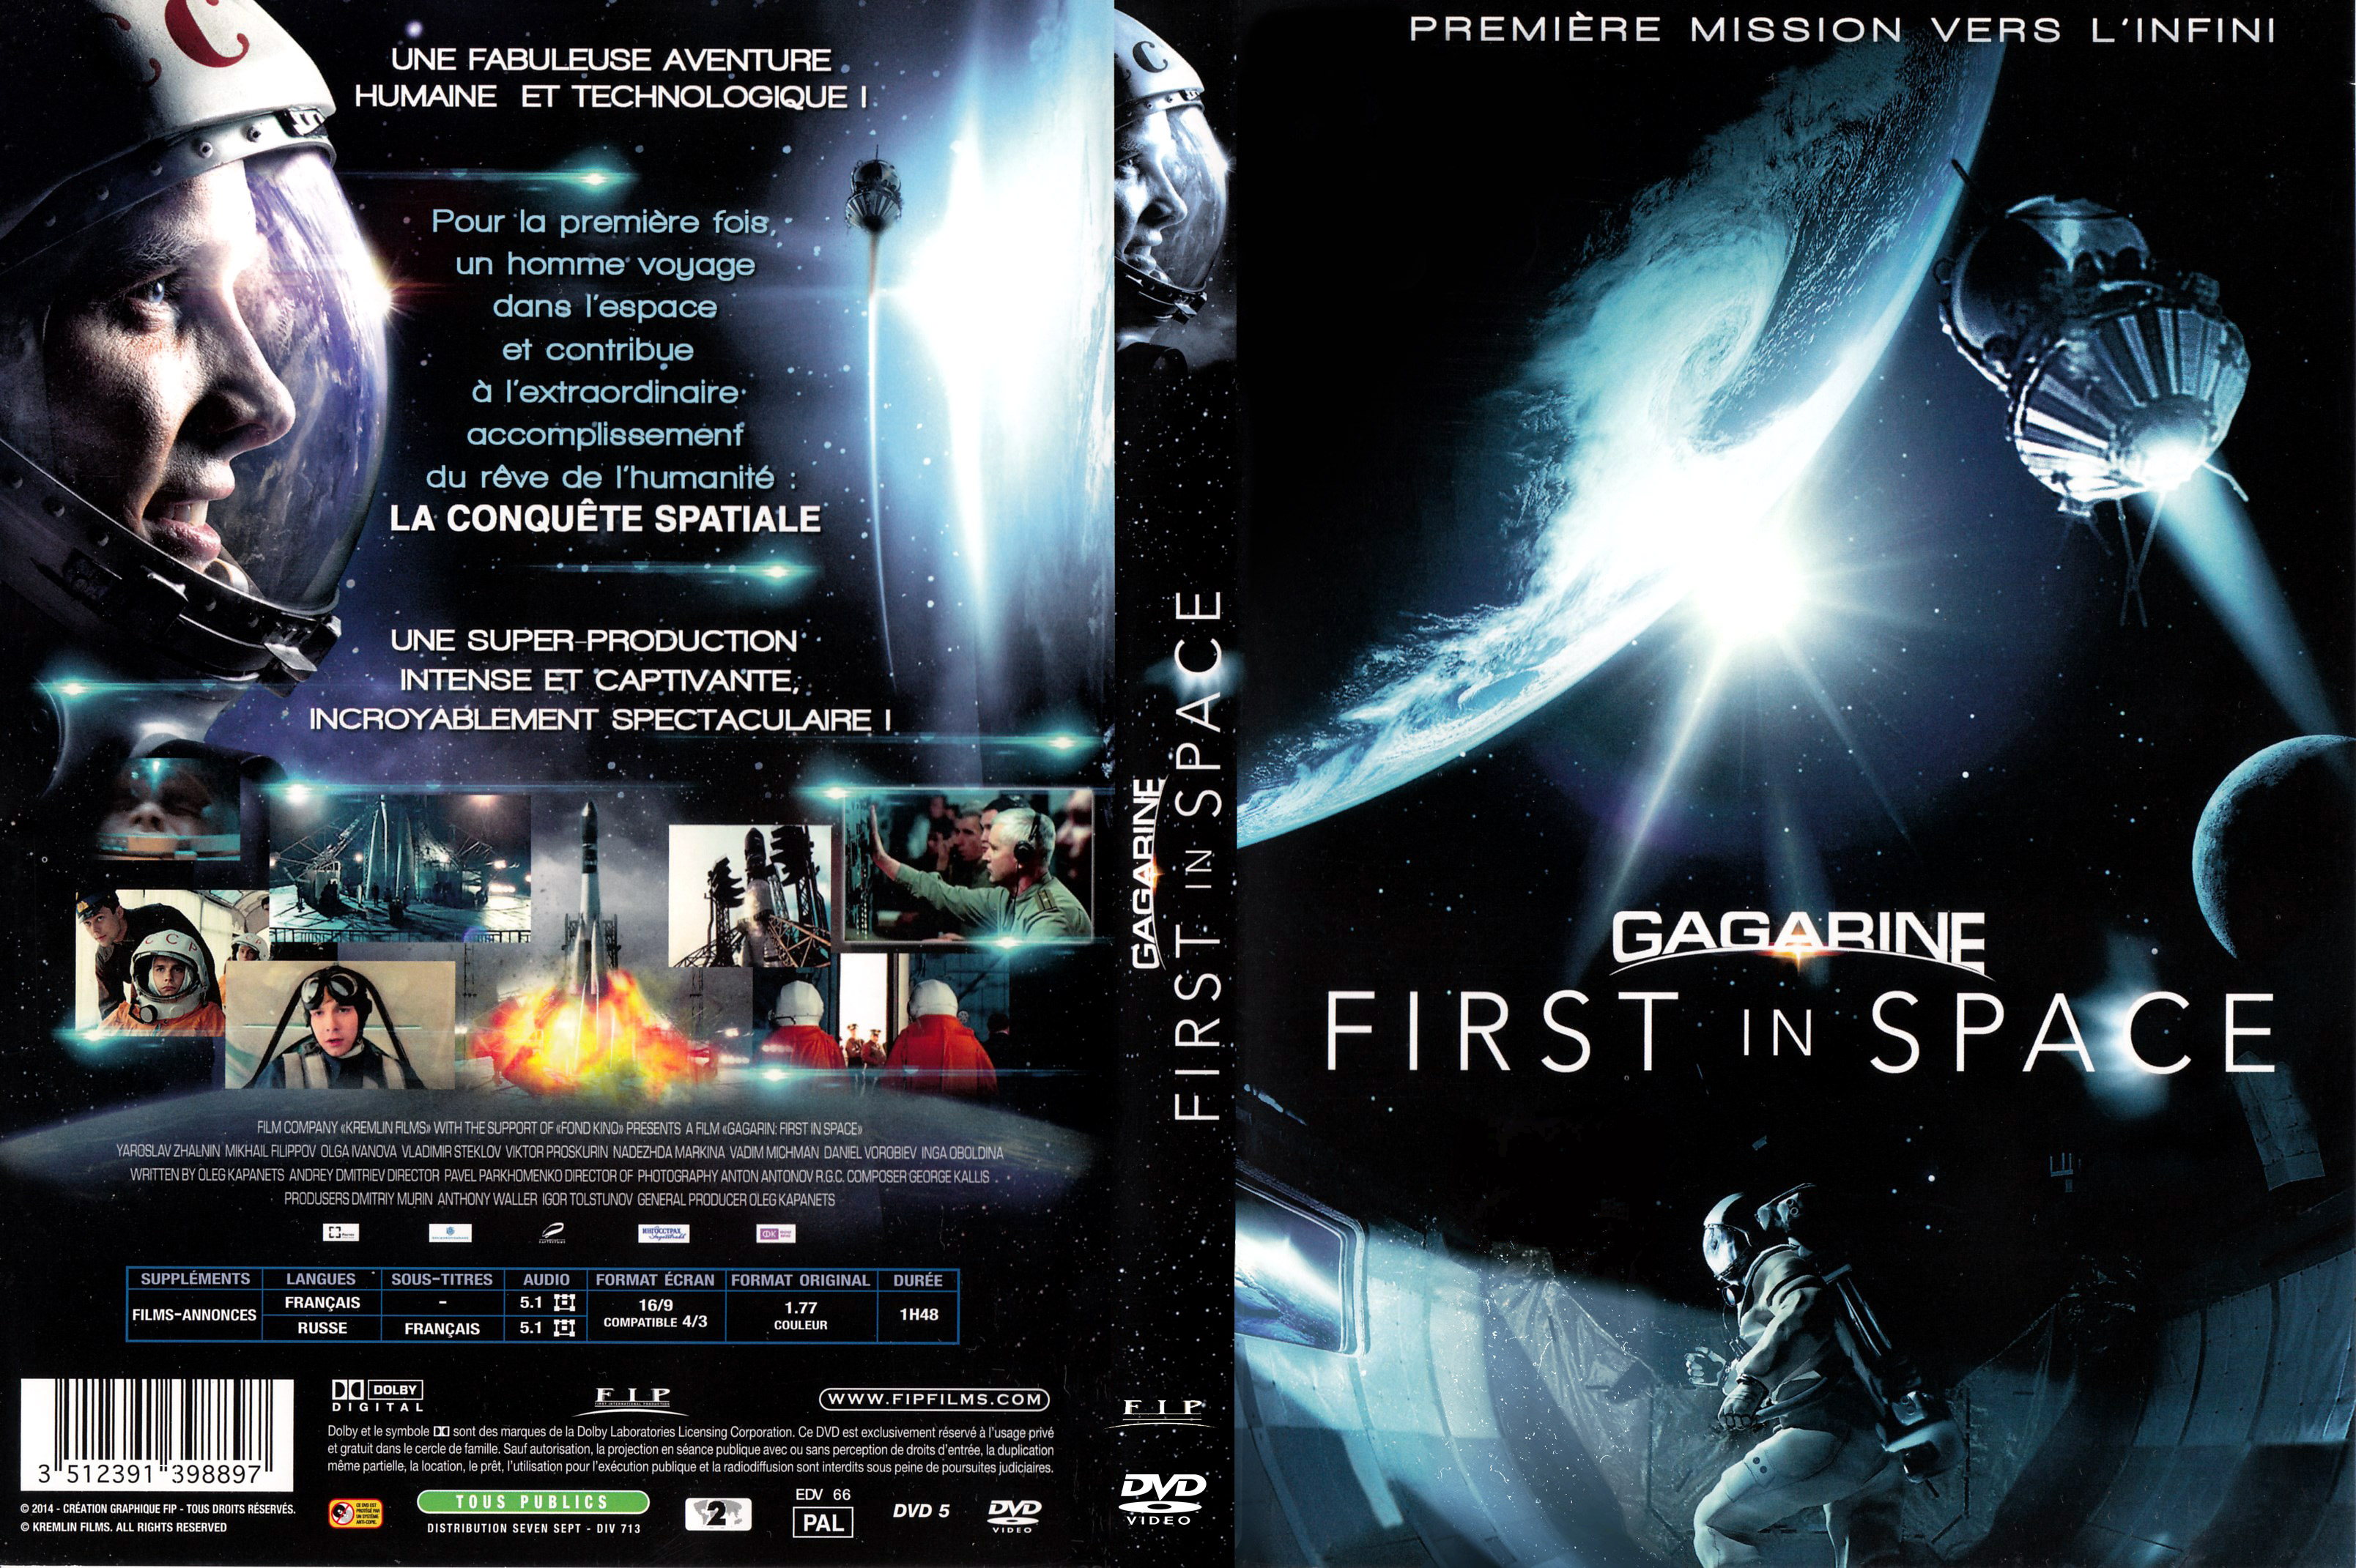 Jaquette DVD Gagarine First in space